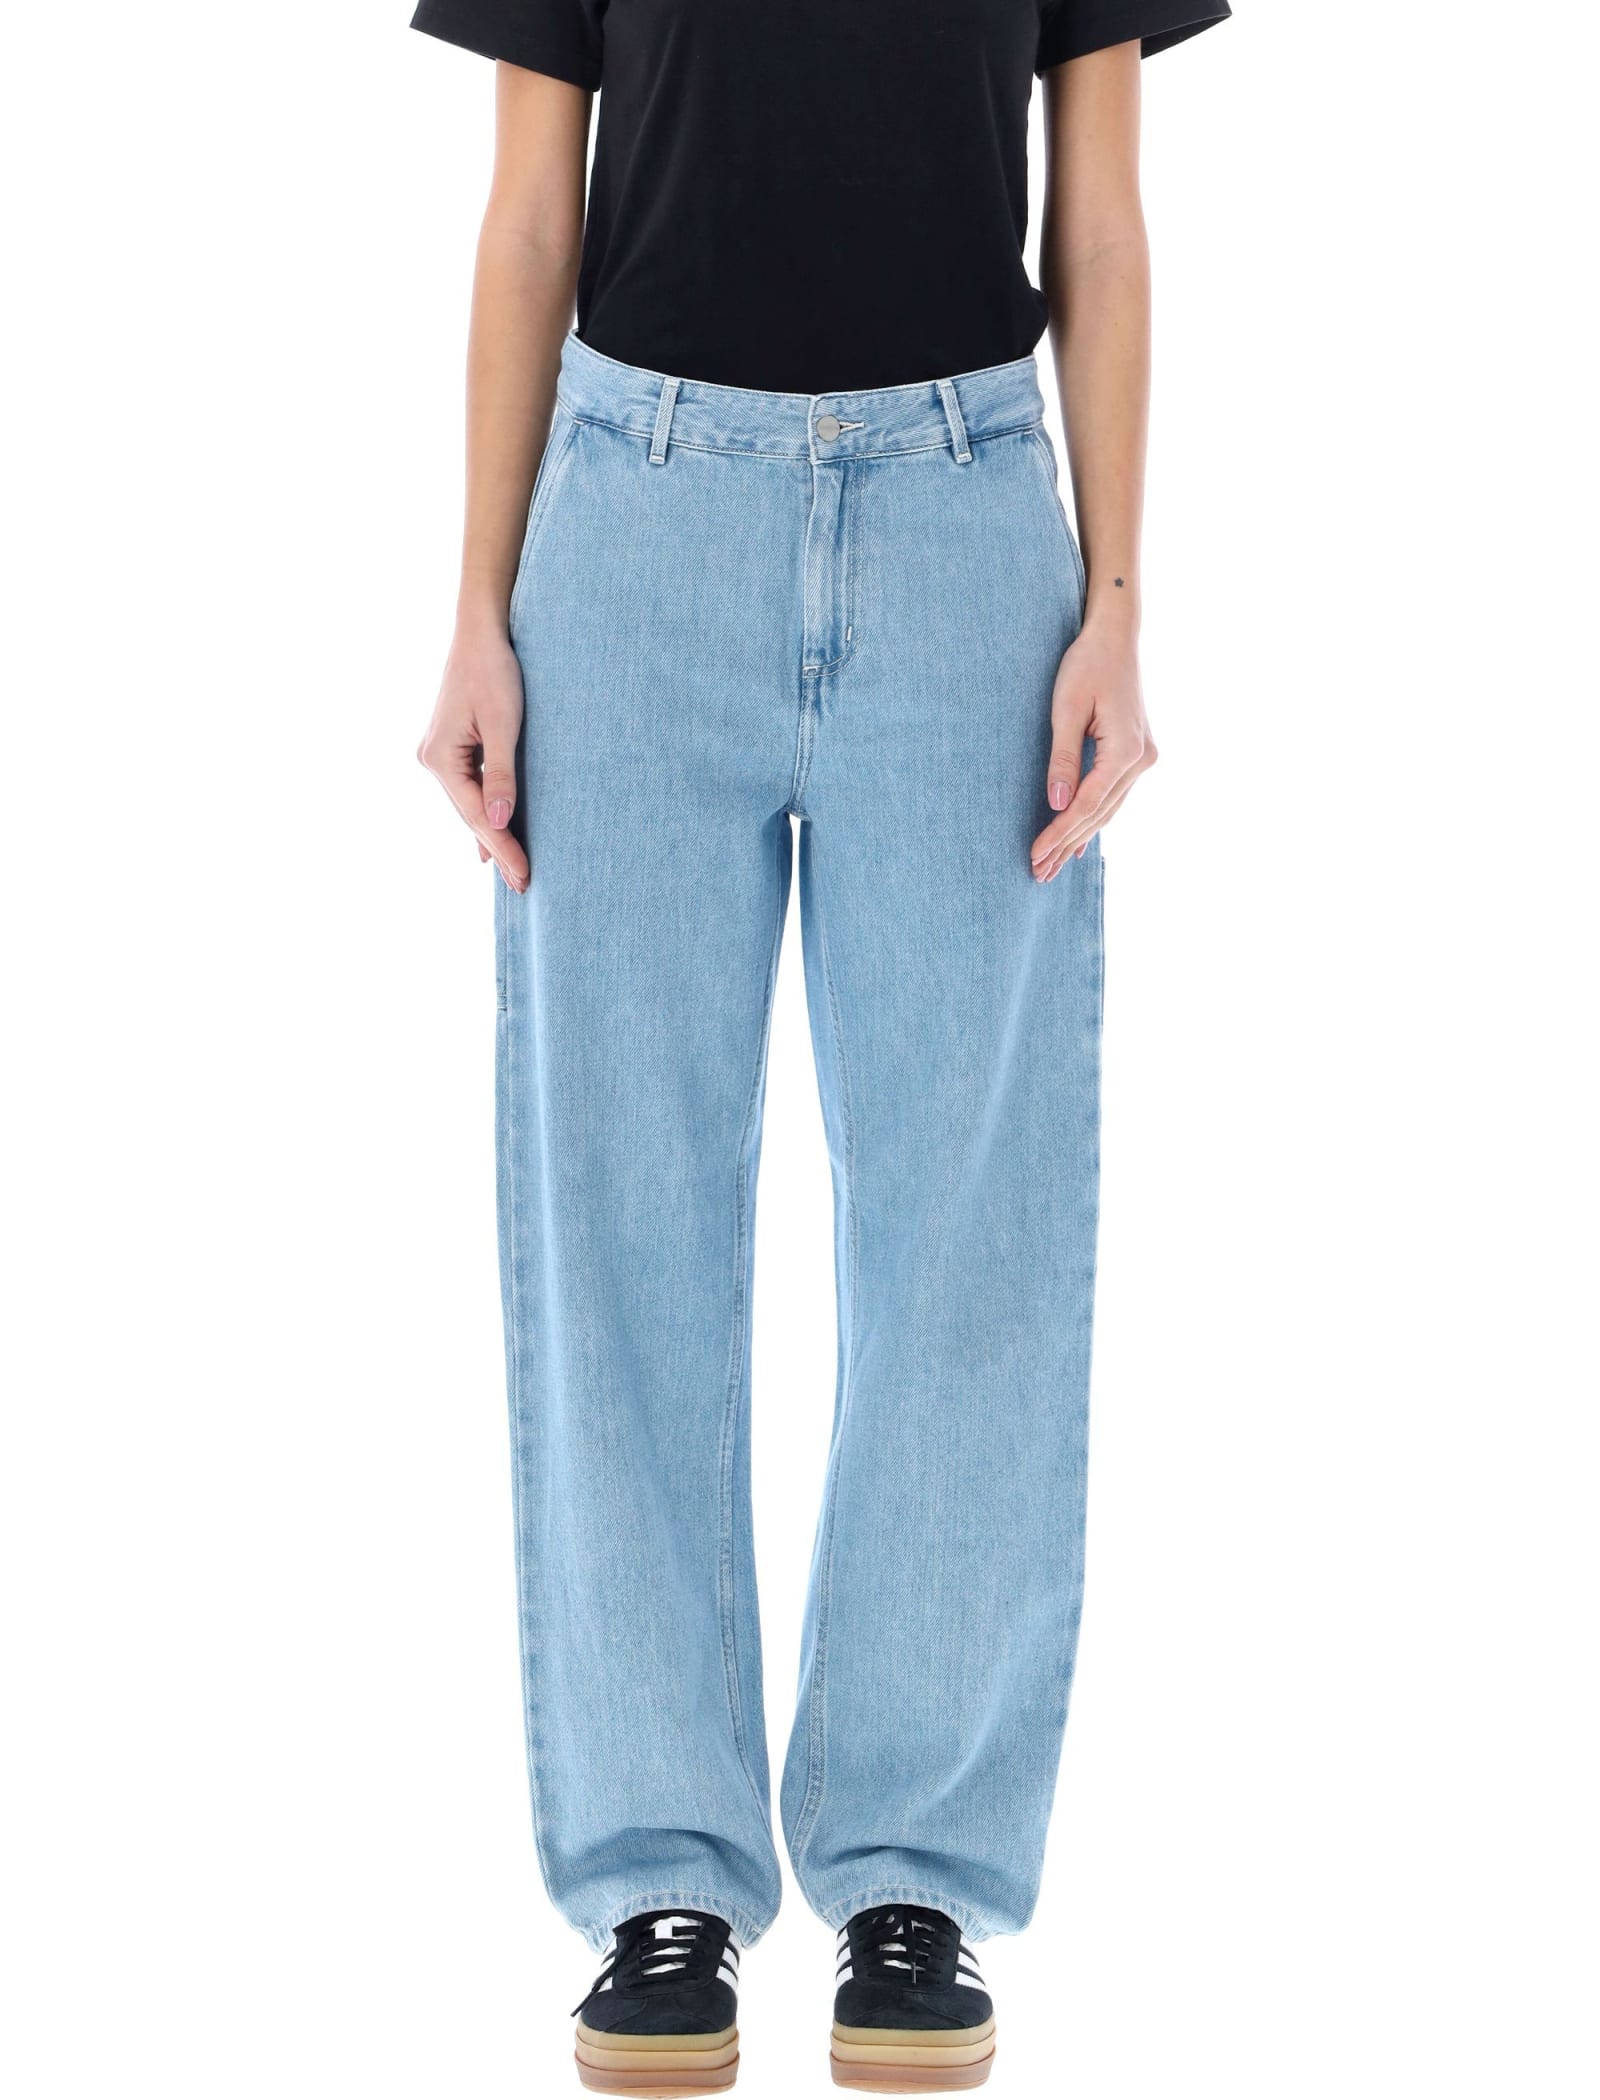 Carhartt W Pierce Pant Straight - 0BLUE STONE BLEACHED - female - Size: Extra Small